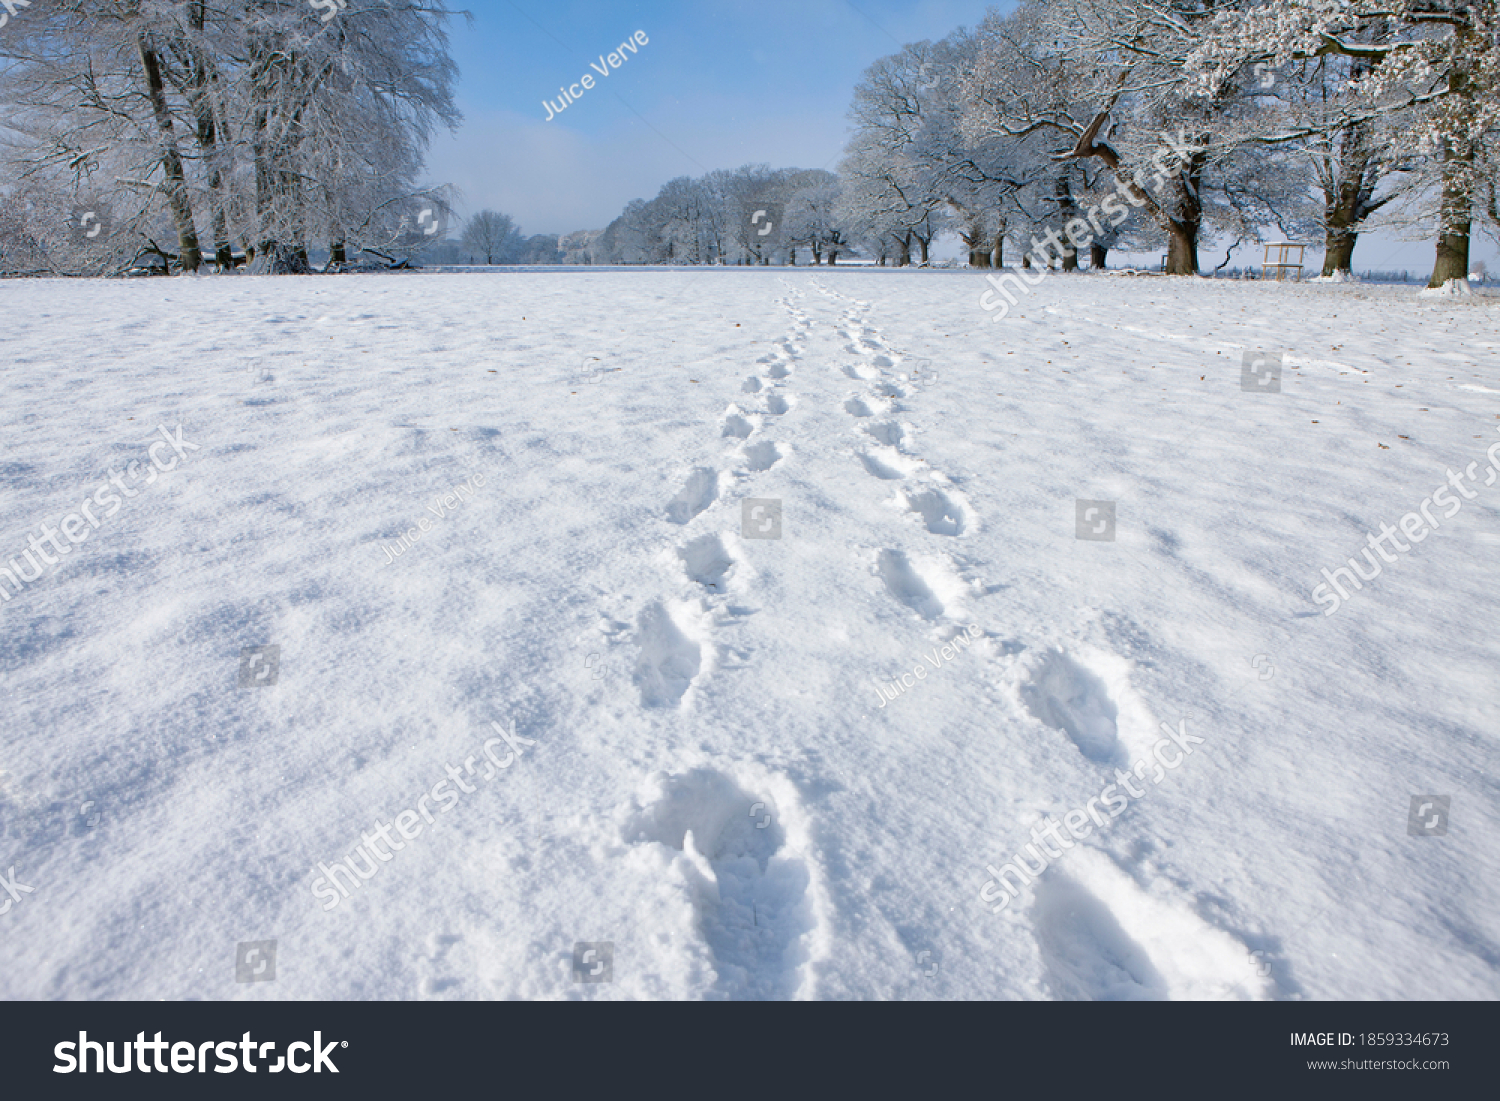 A medium shot of footprints on fresh snow on a pathway in winter. #1859334673